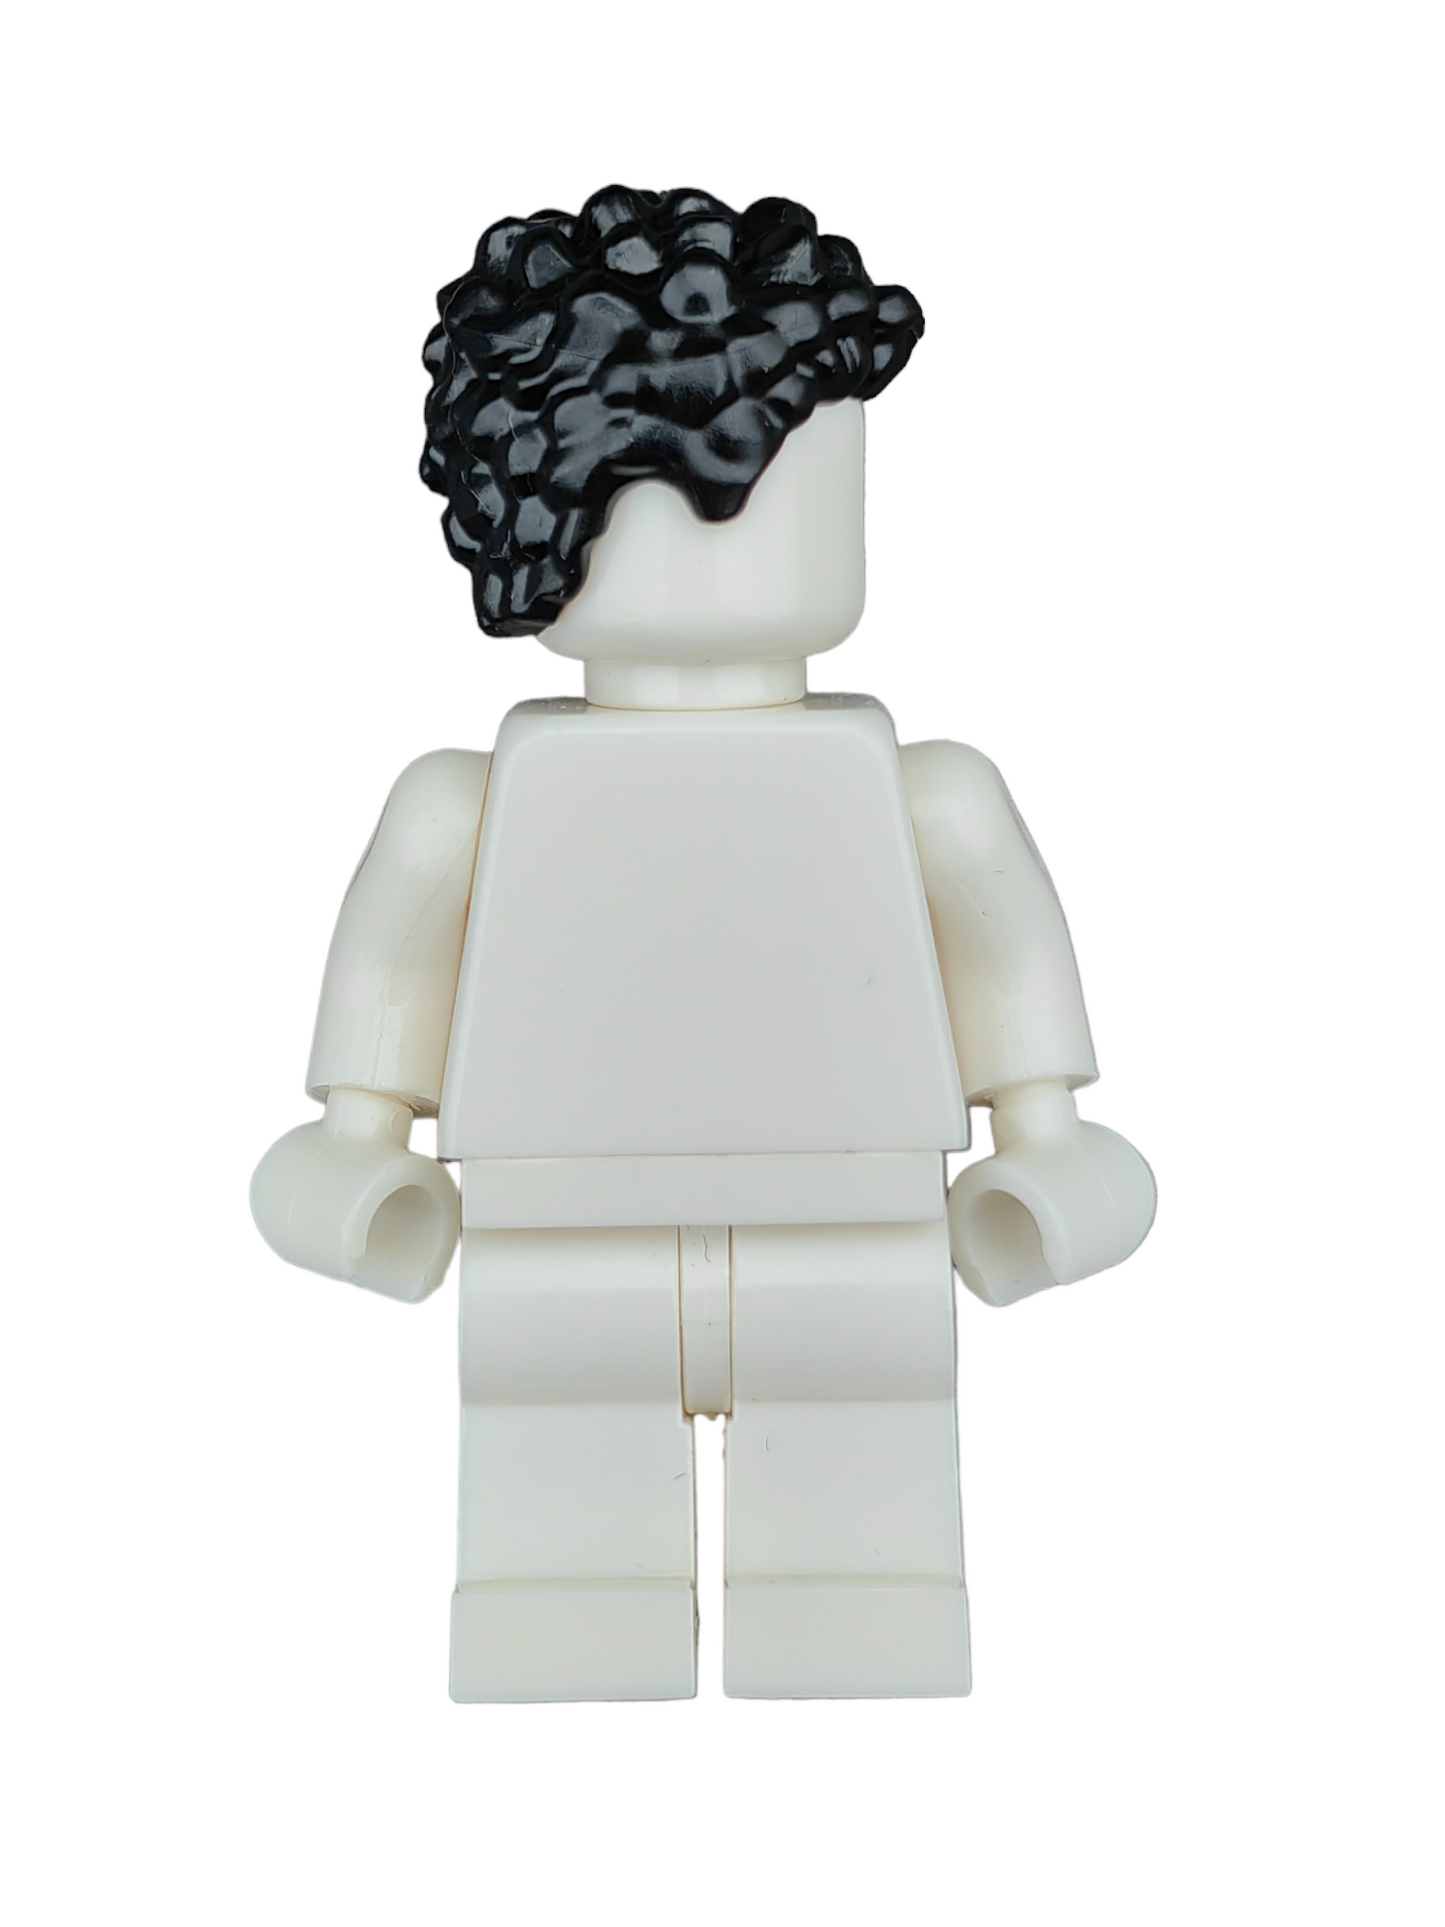 LEGO Wig, Black Hair Coiled and Short- UB1186